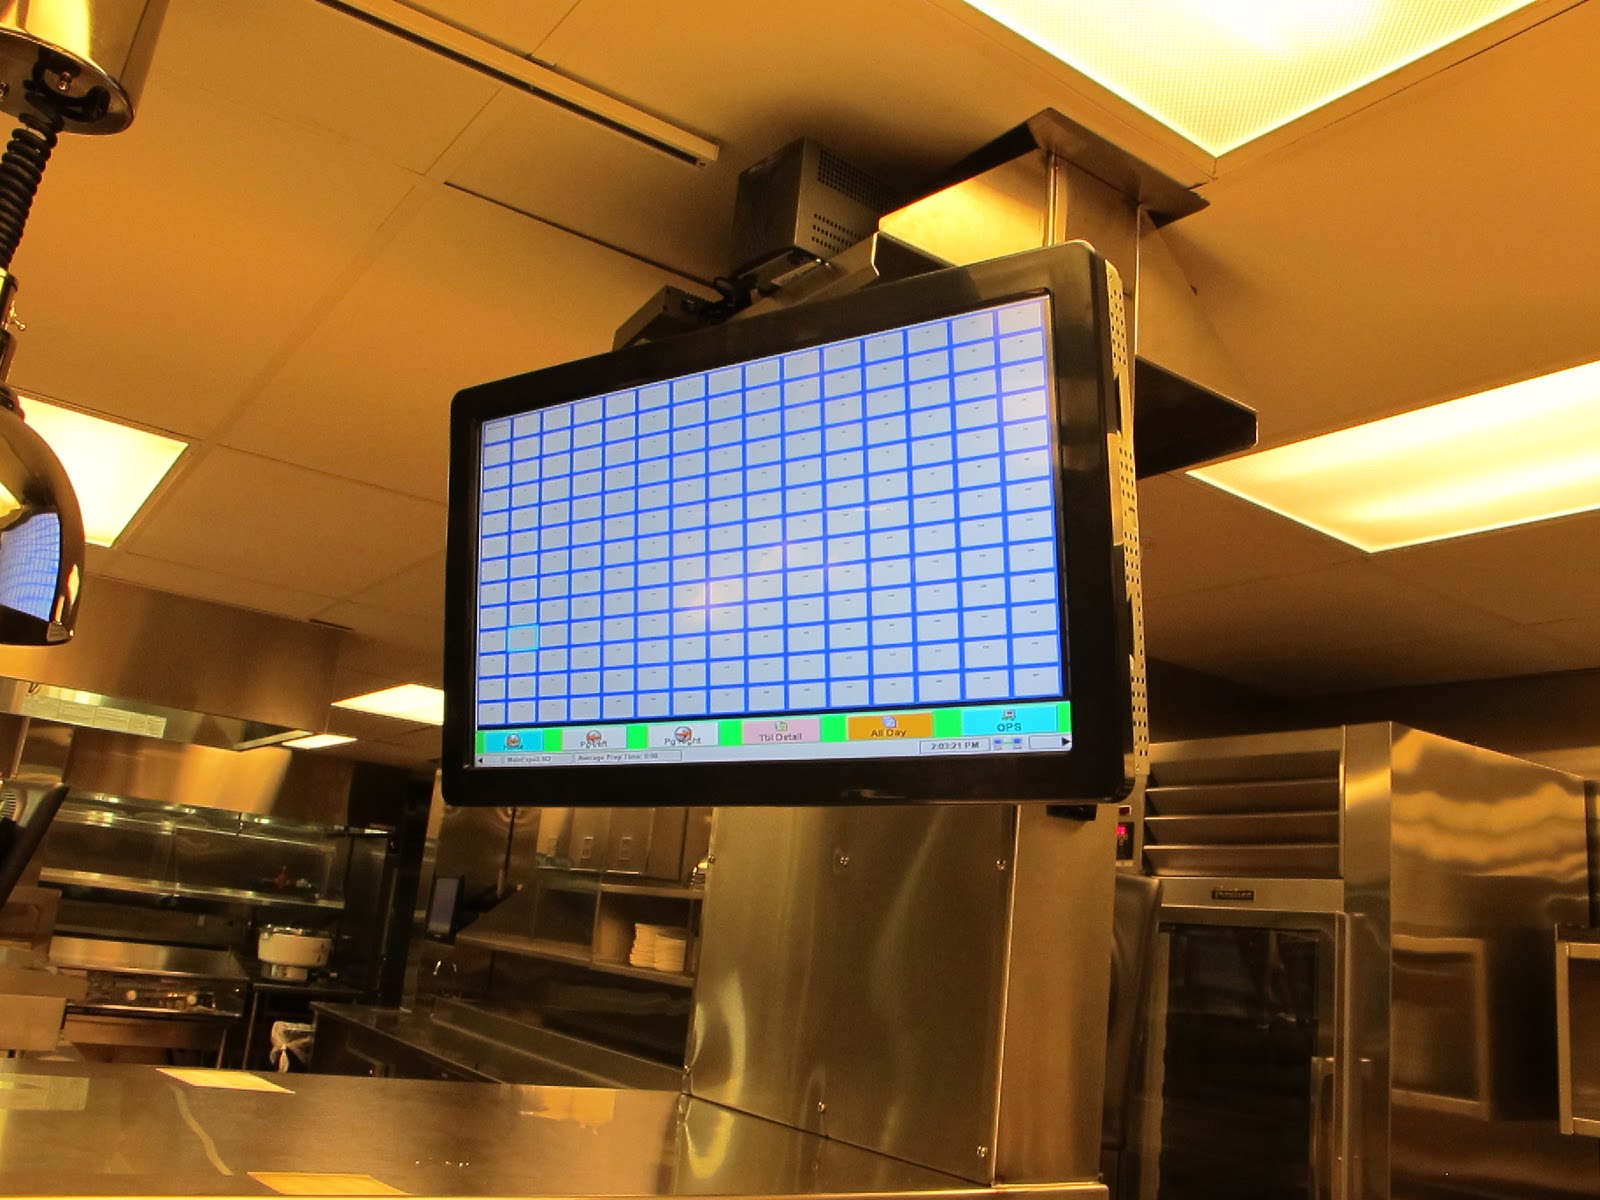 POSmelson: KDS (Kitchen Display Systems) at The Hamilton in Washington, DC